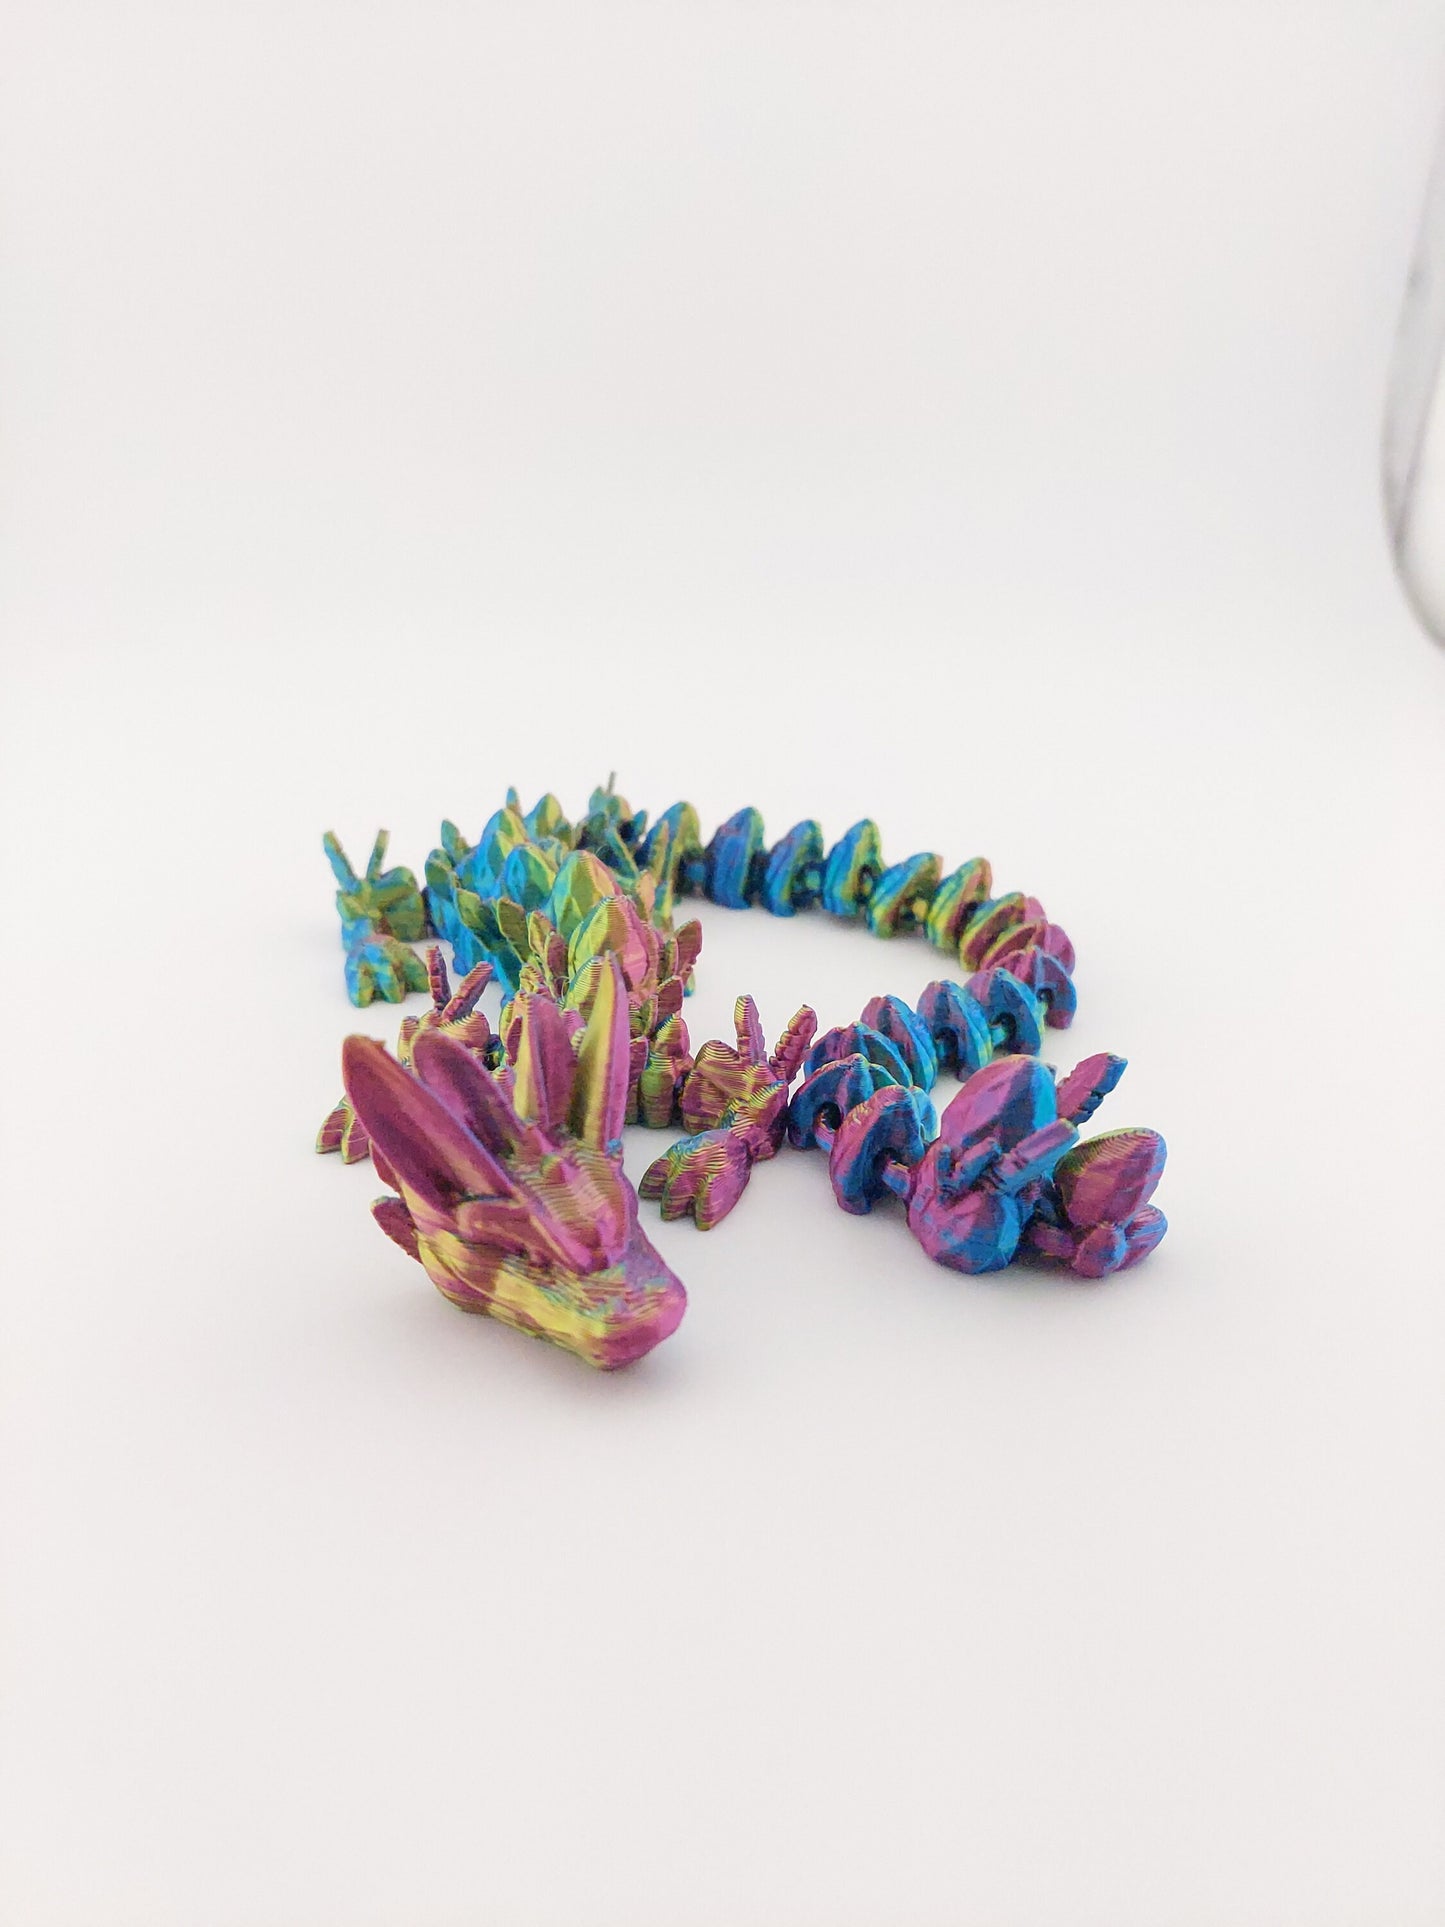 Articulated Easter Egg Dragon - Flexible Sensory Toy - Unique Gift